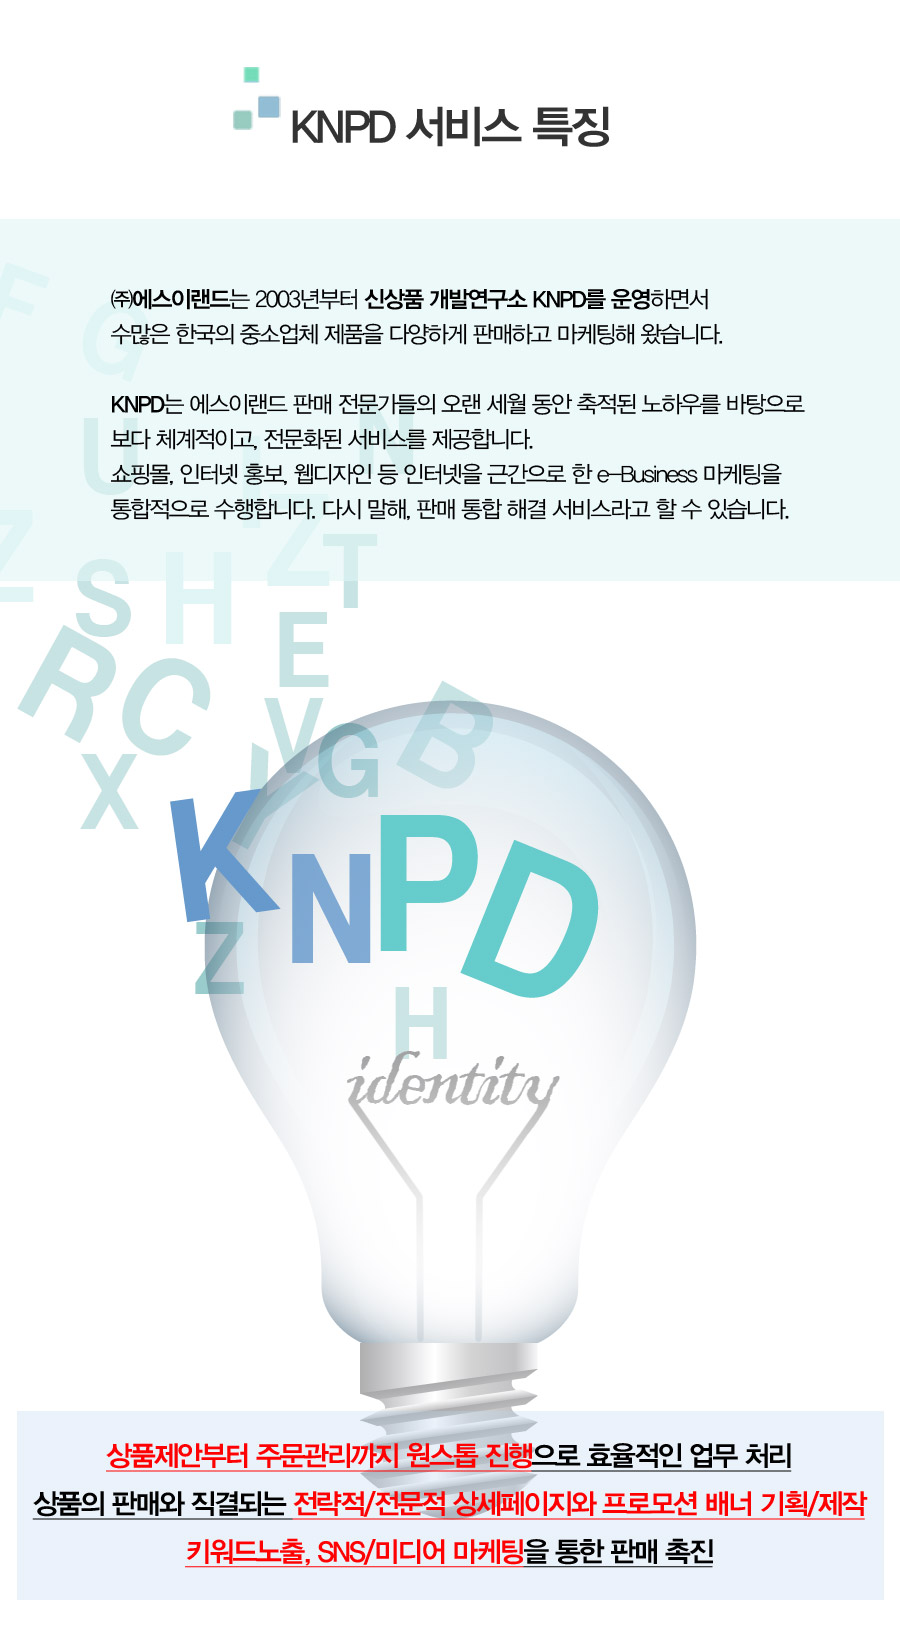 KNPD 서비스 특징